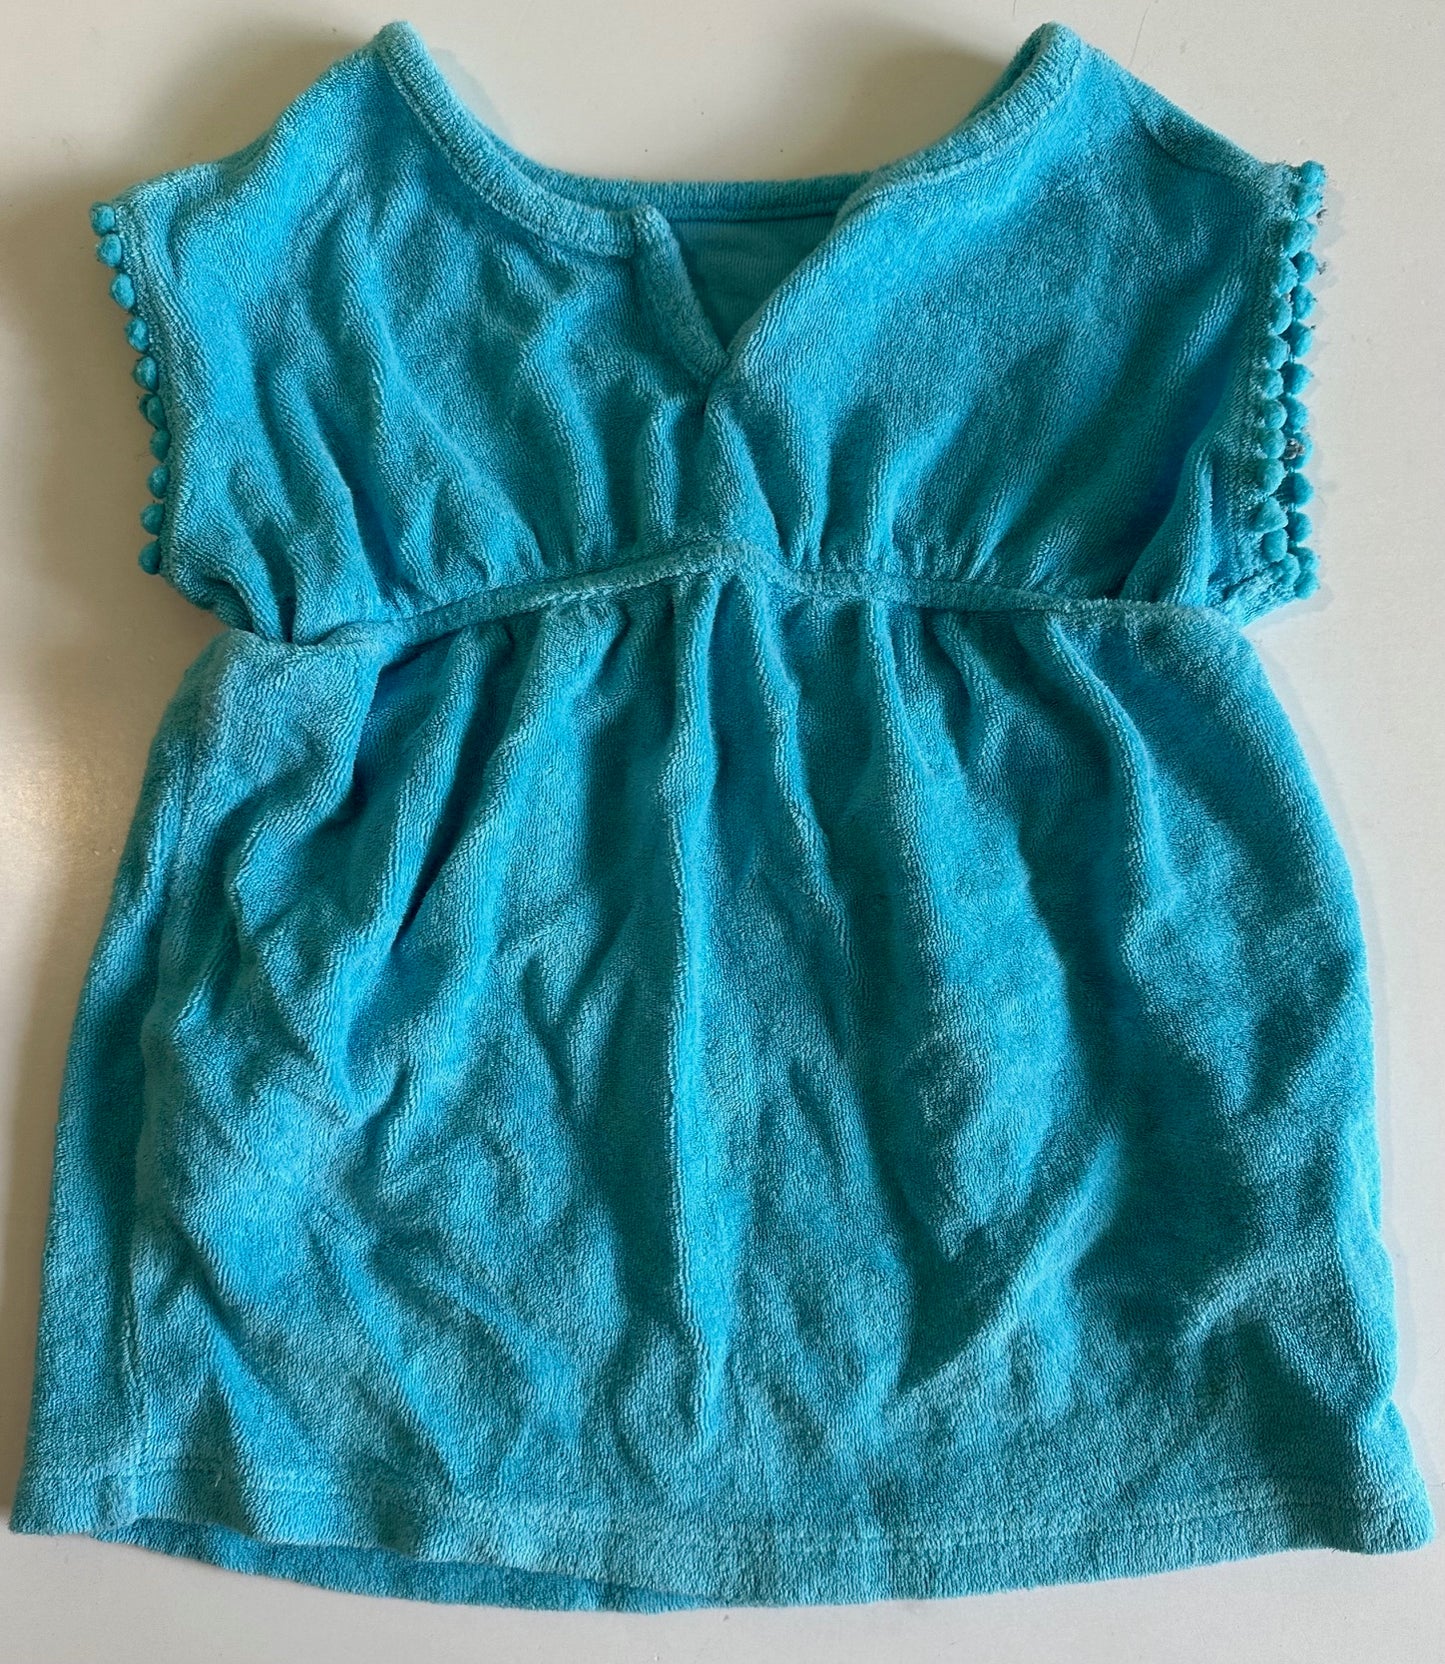 *Play* George, Blue Terry Cloth Top - Size 3T